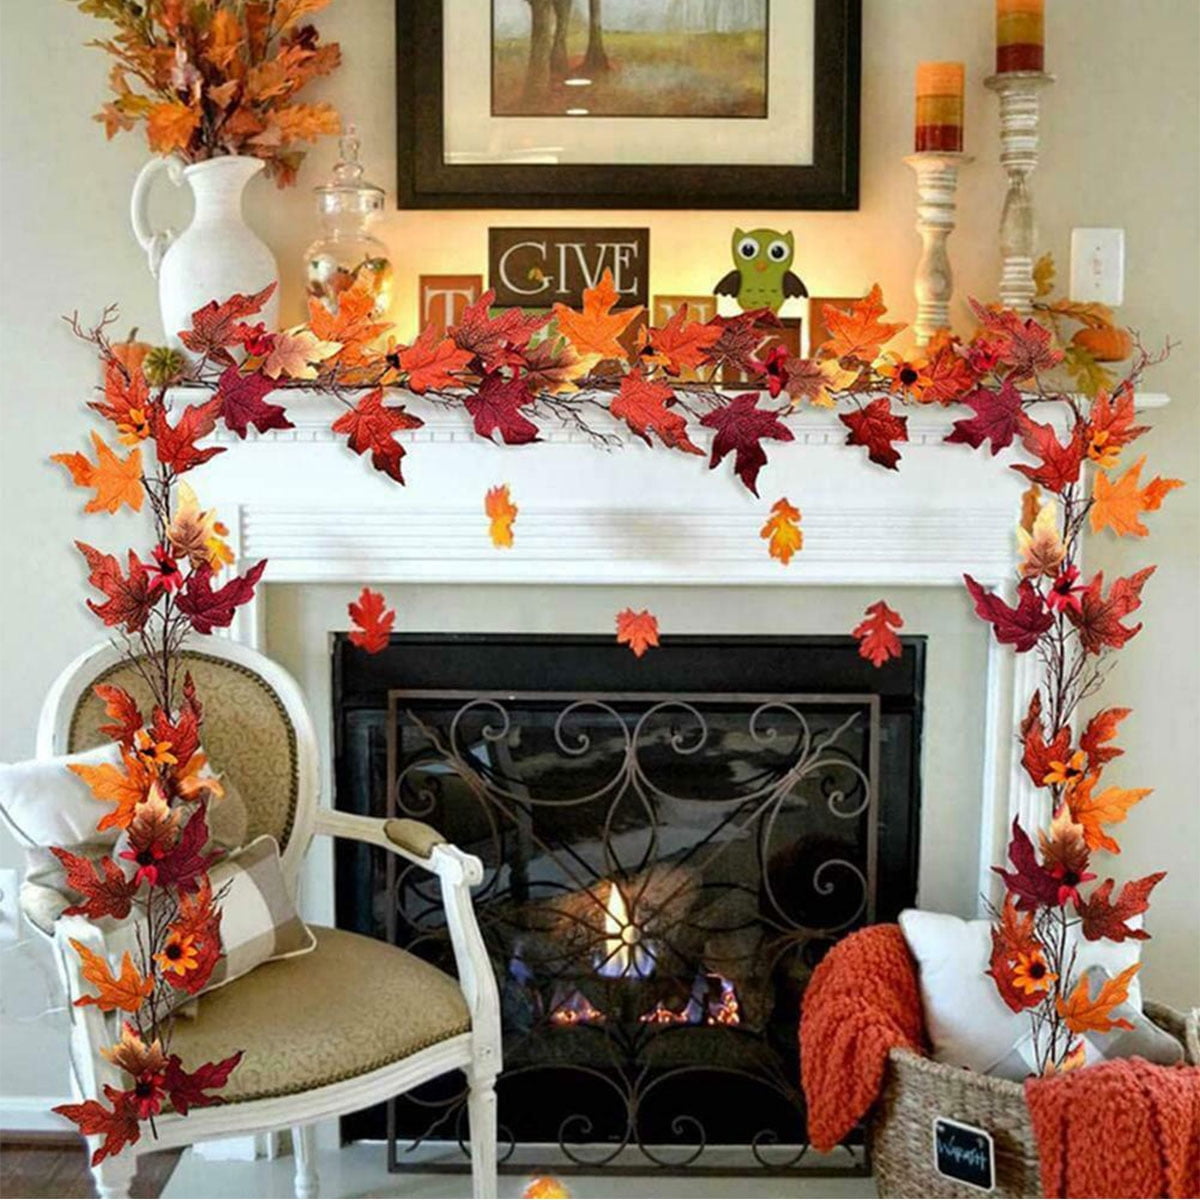 1.7M Fall Maple Leaves Lighted Garland Decor- Thanksgiving String Lights Decorations Autumn Halloween Party Ornament ( Batteries Not Included)